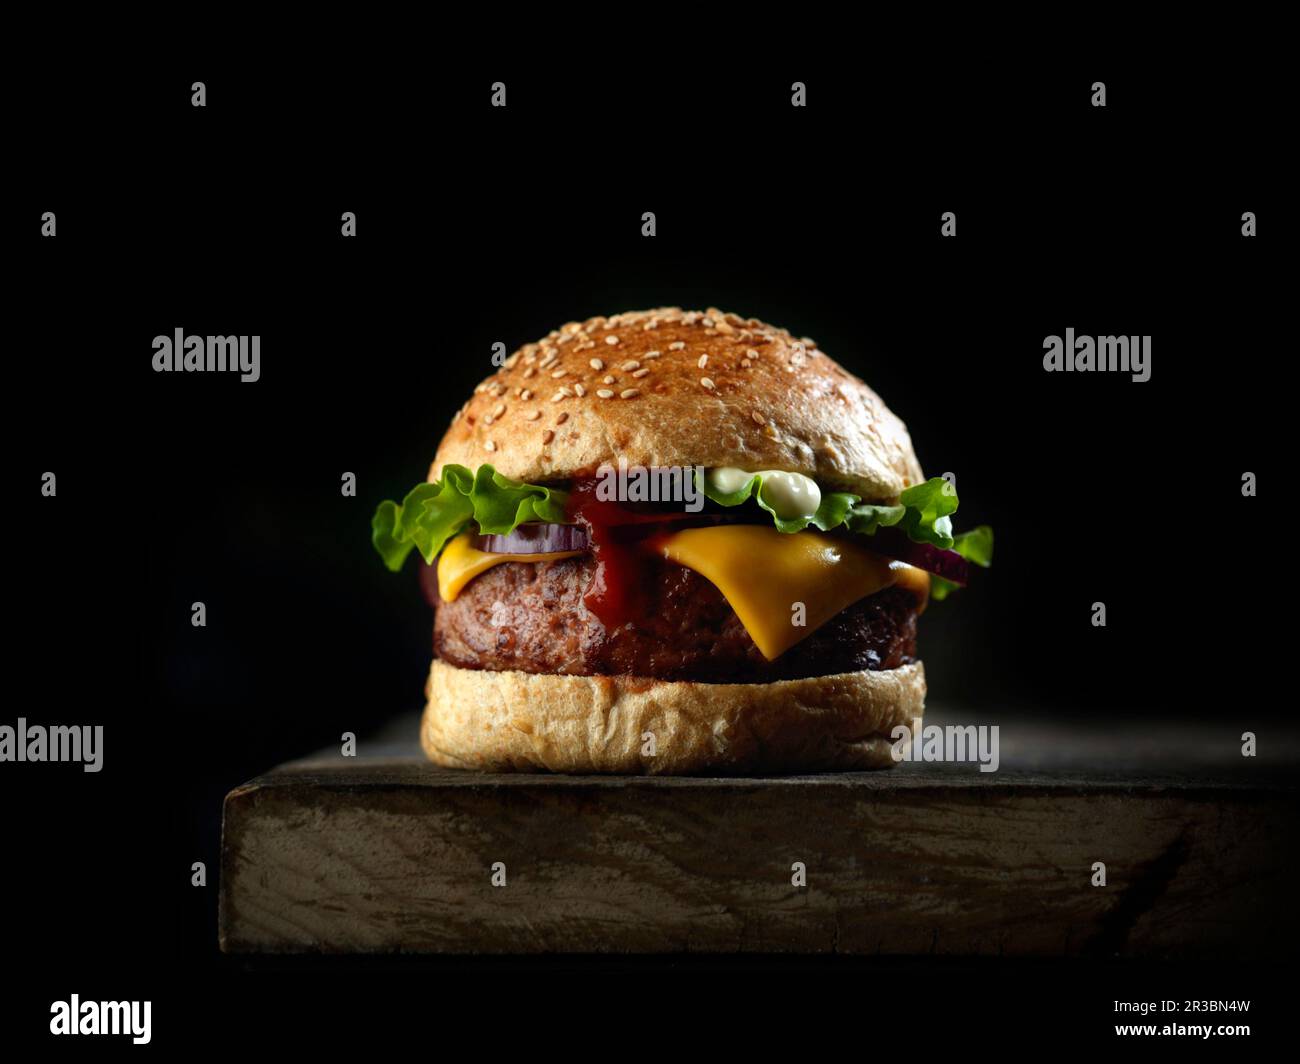 Burger with cheese and lettuce against a black background Stock Photo